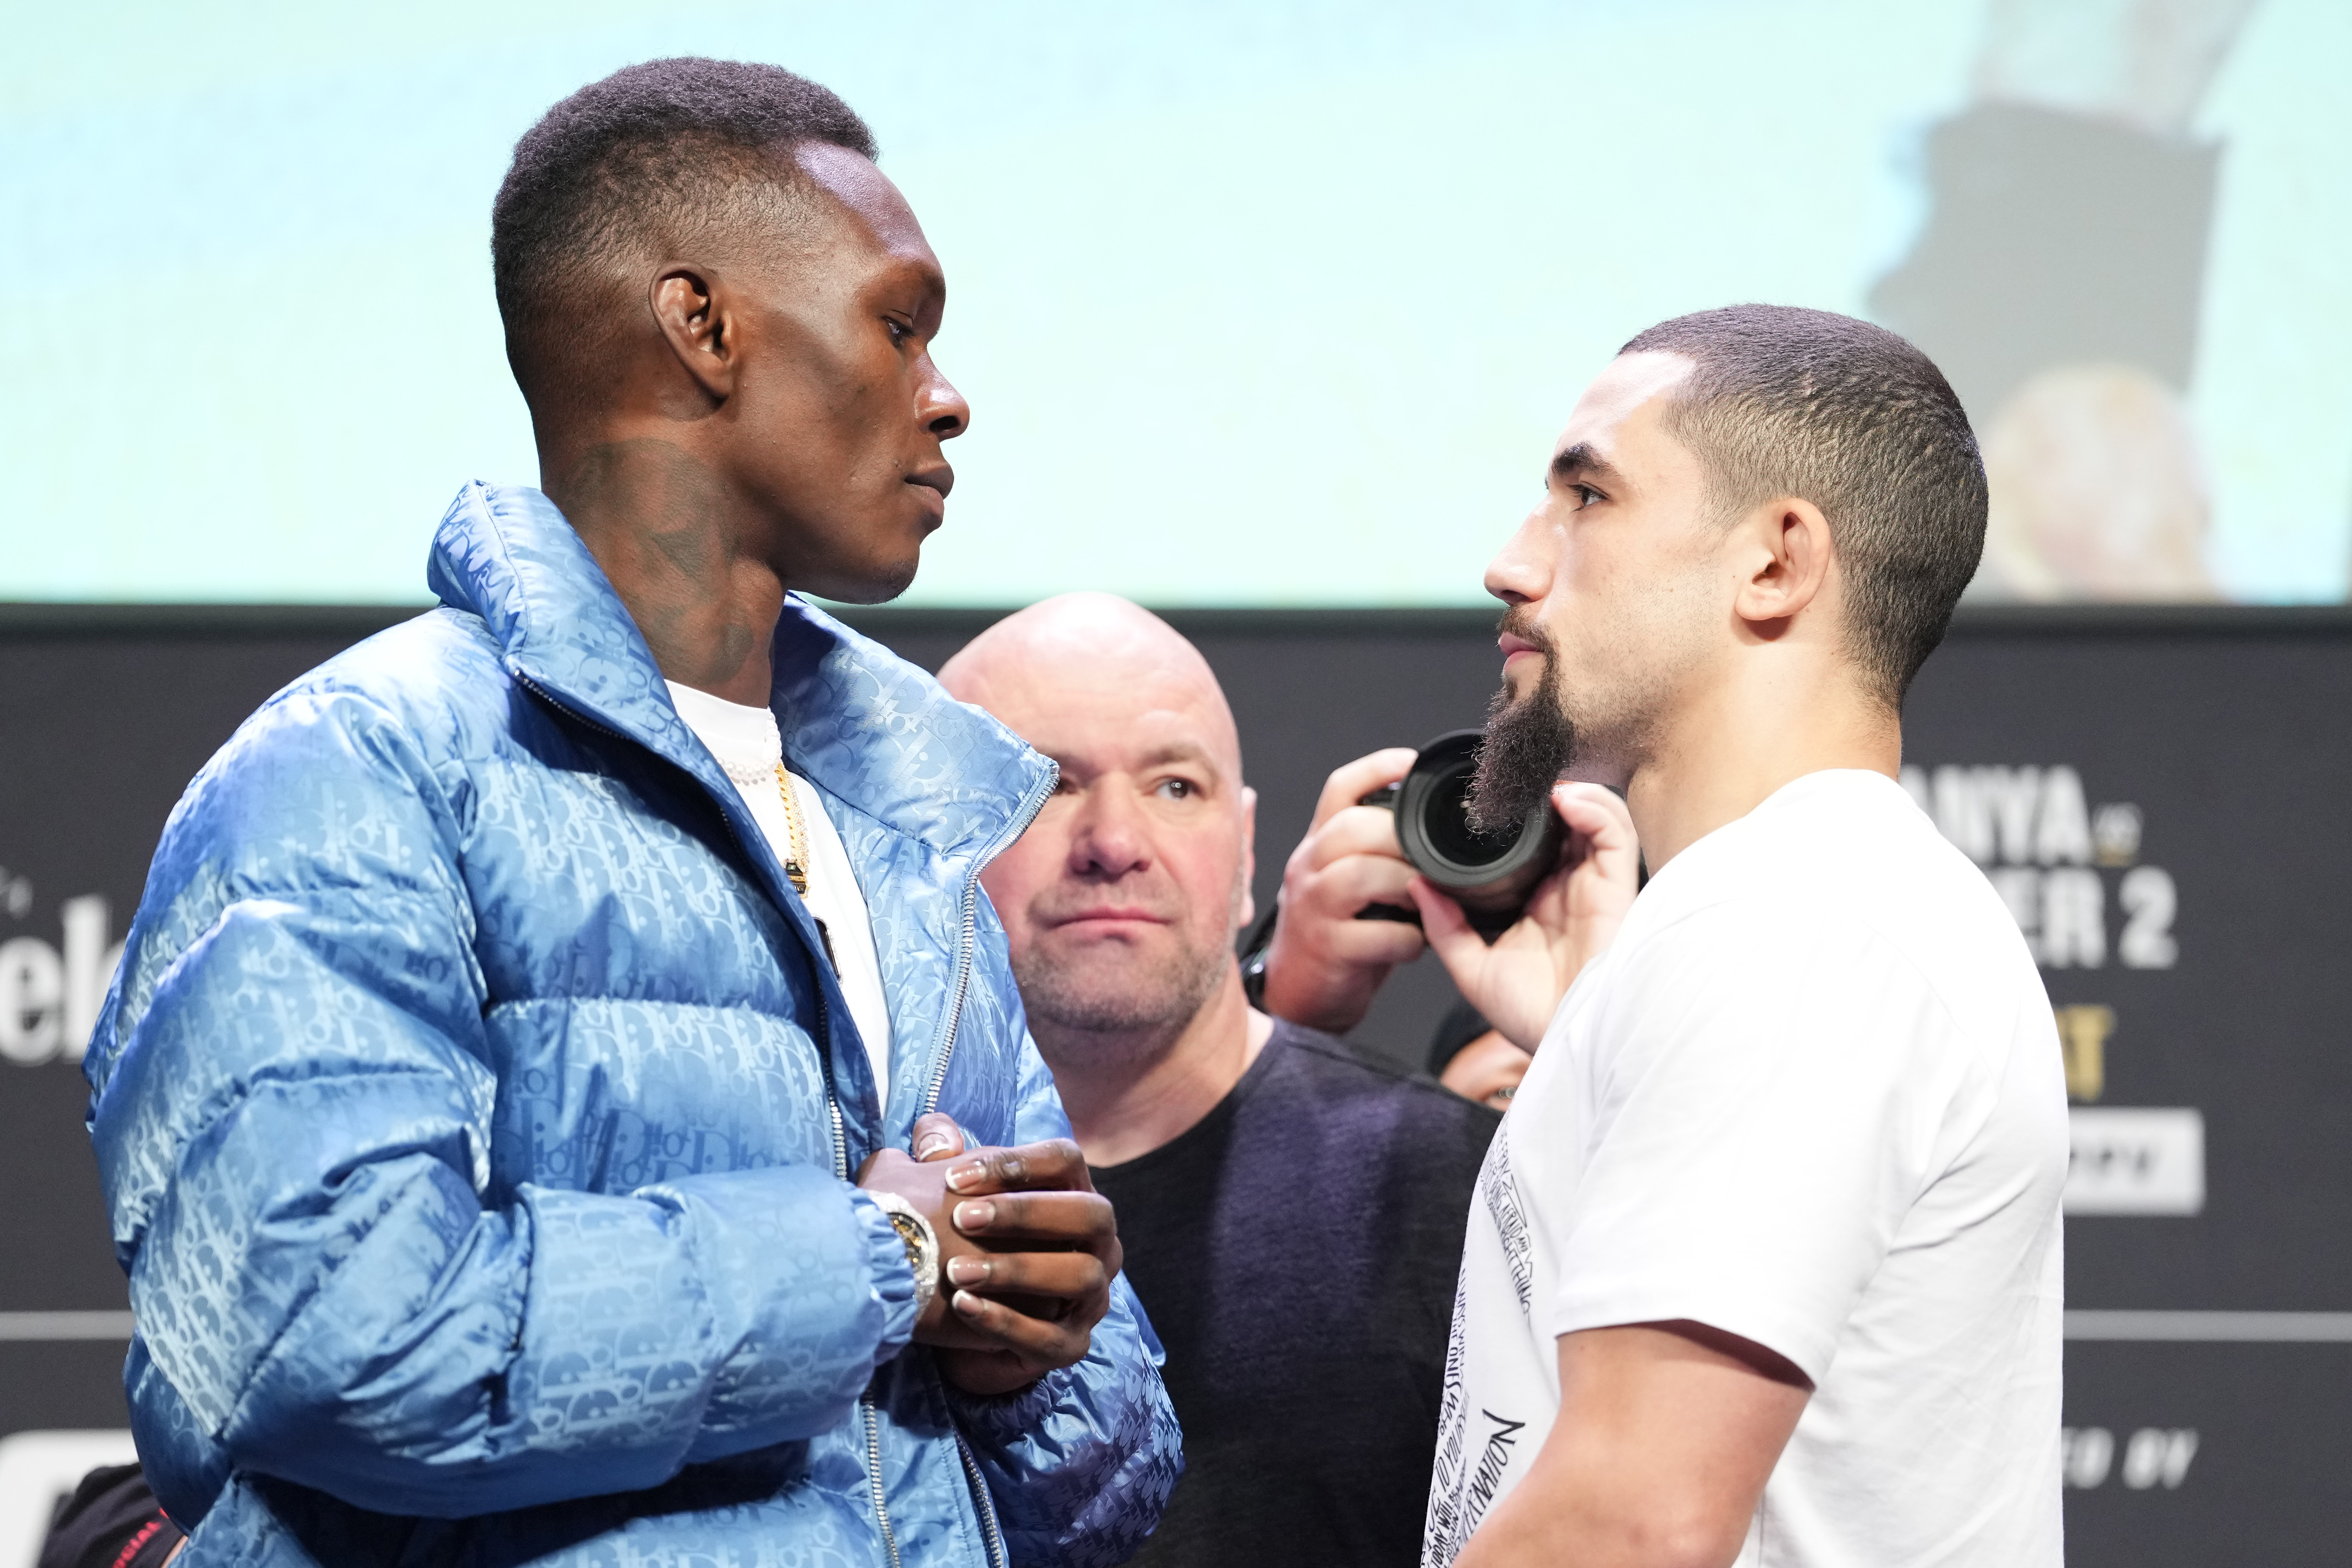 Opponents Israel Adesanya of Nigeria and Robert Whittaker of Australia face off during the UFC 271 press conference at George R. Brown Convention Center on February 10, 2022 in Houston, Texas.